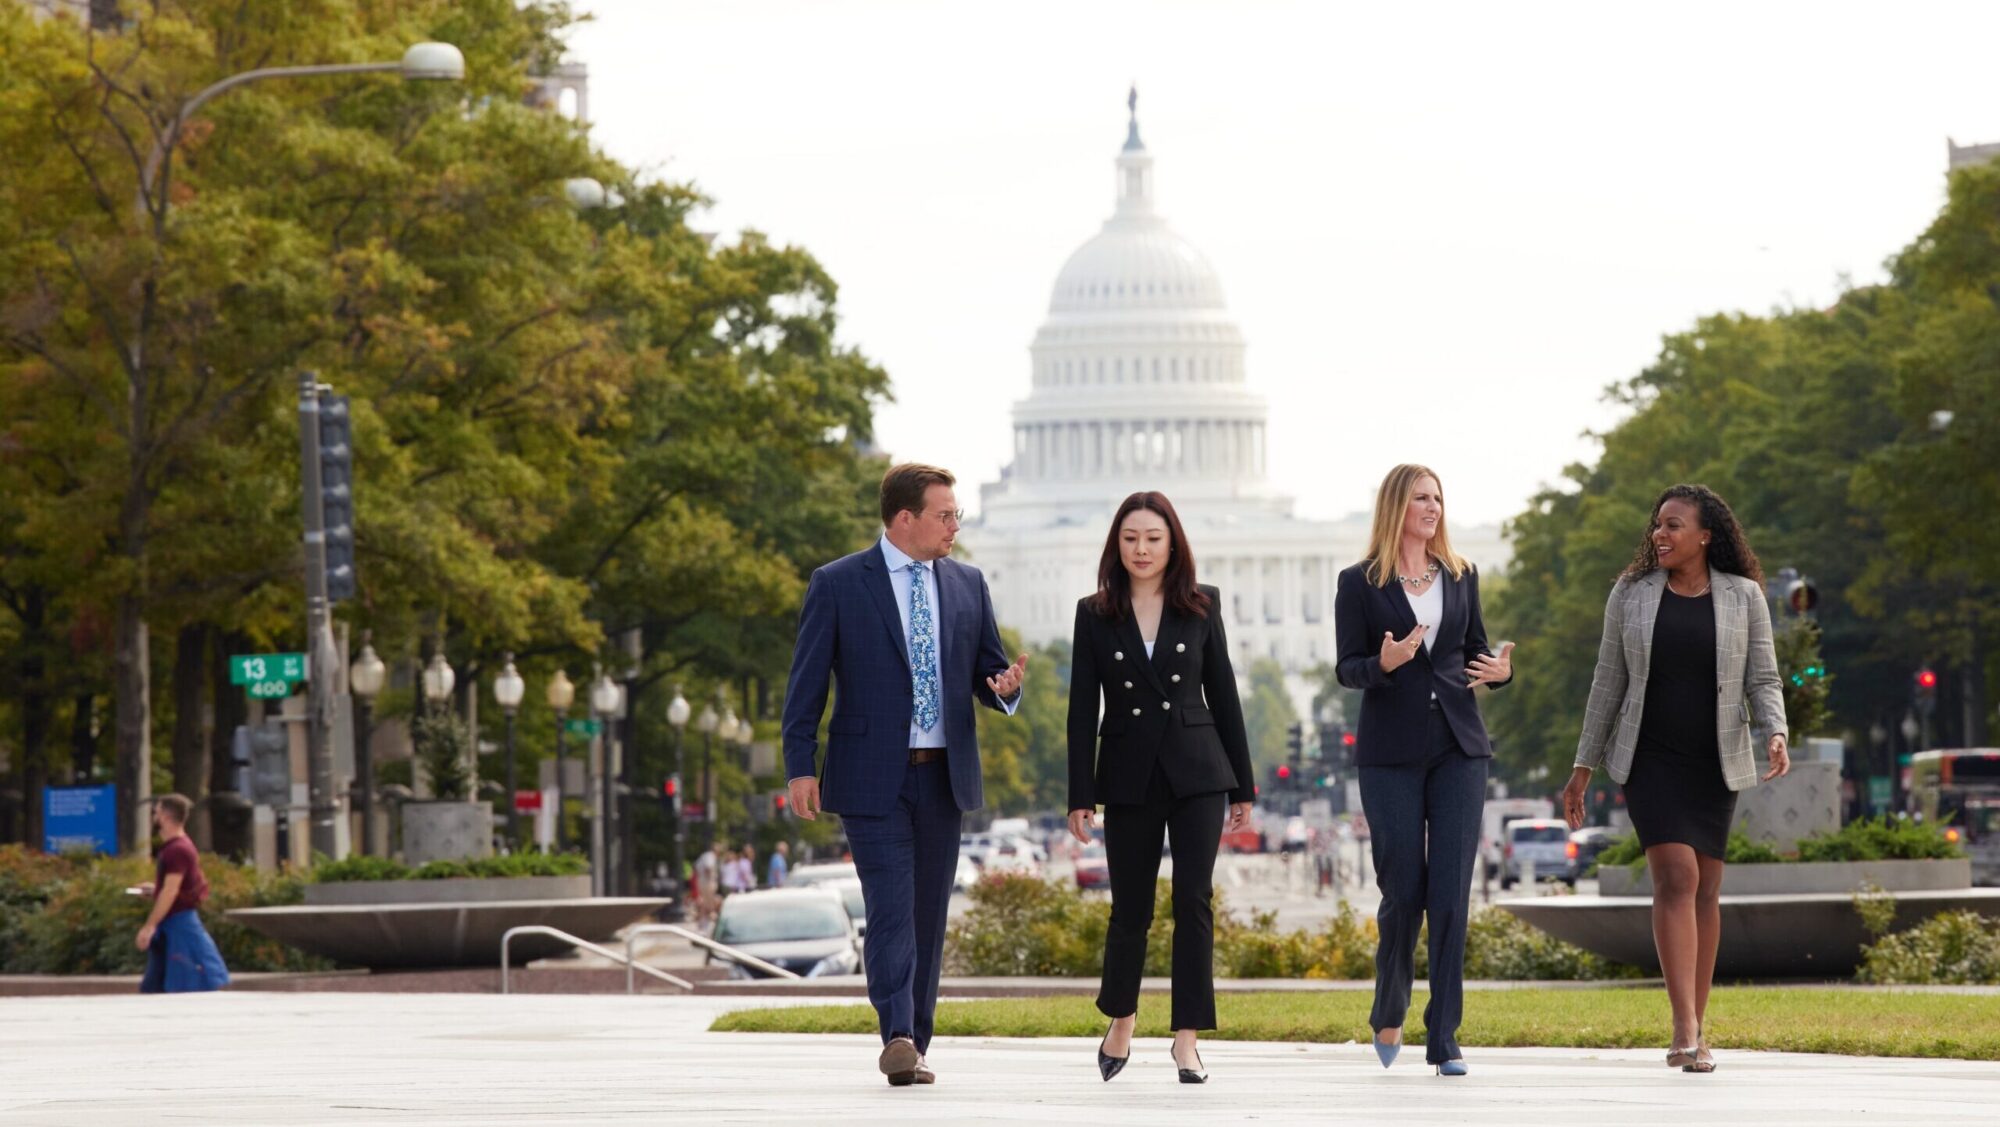 Executive MBA (EMBA) students walking in front of the capital in suits